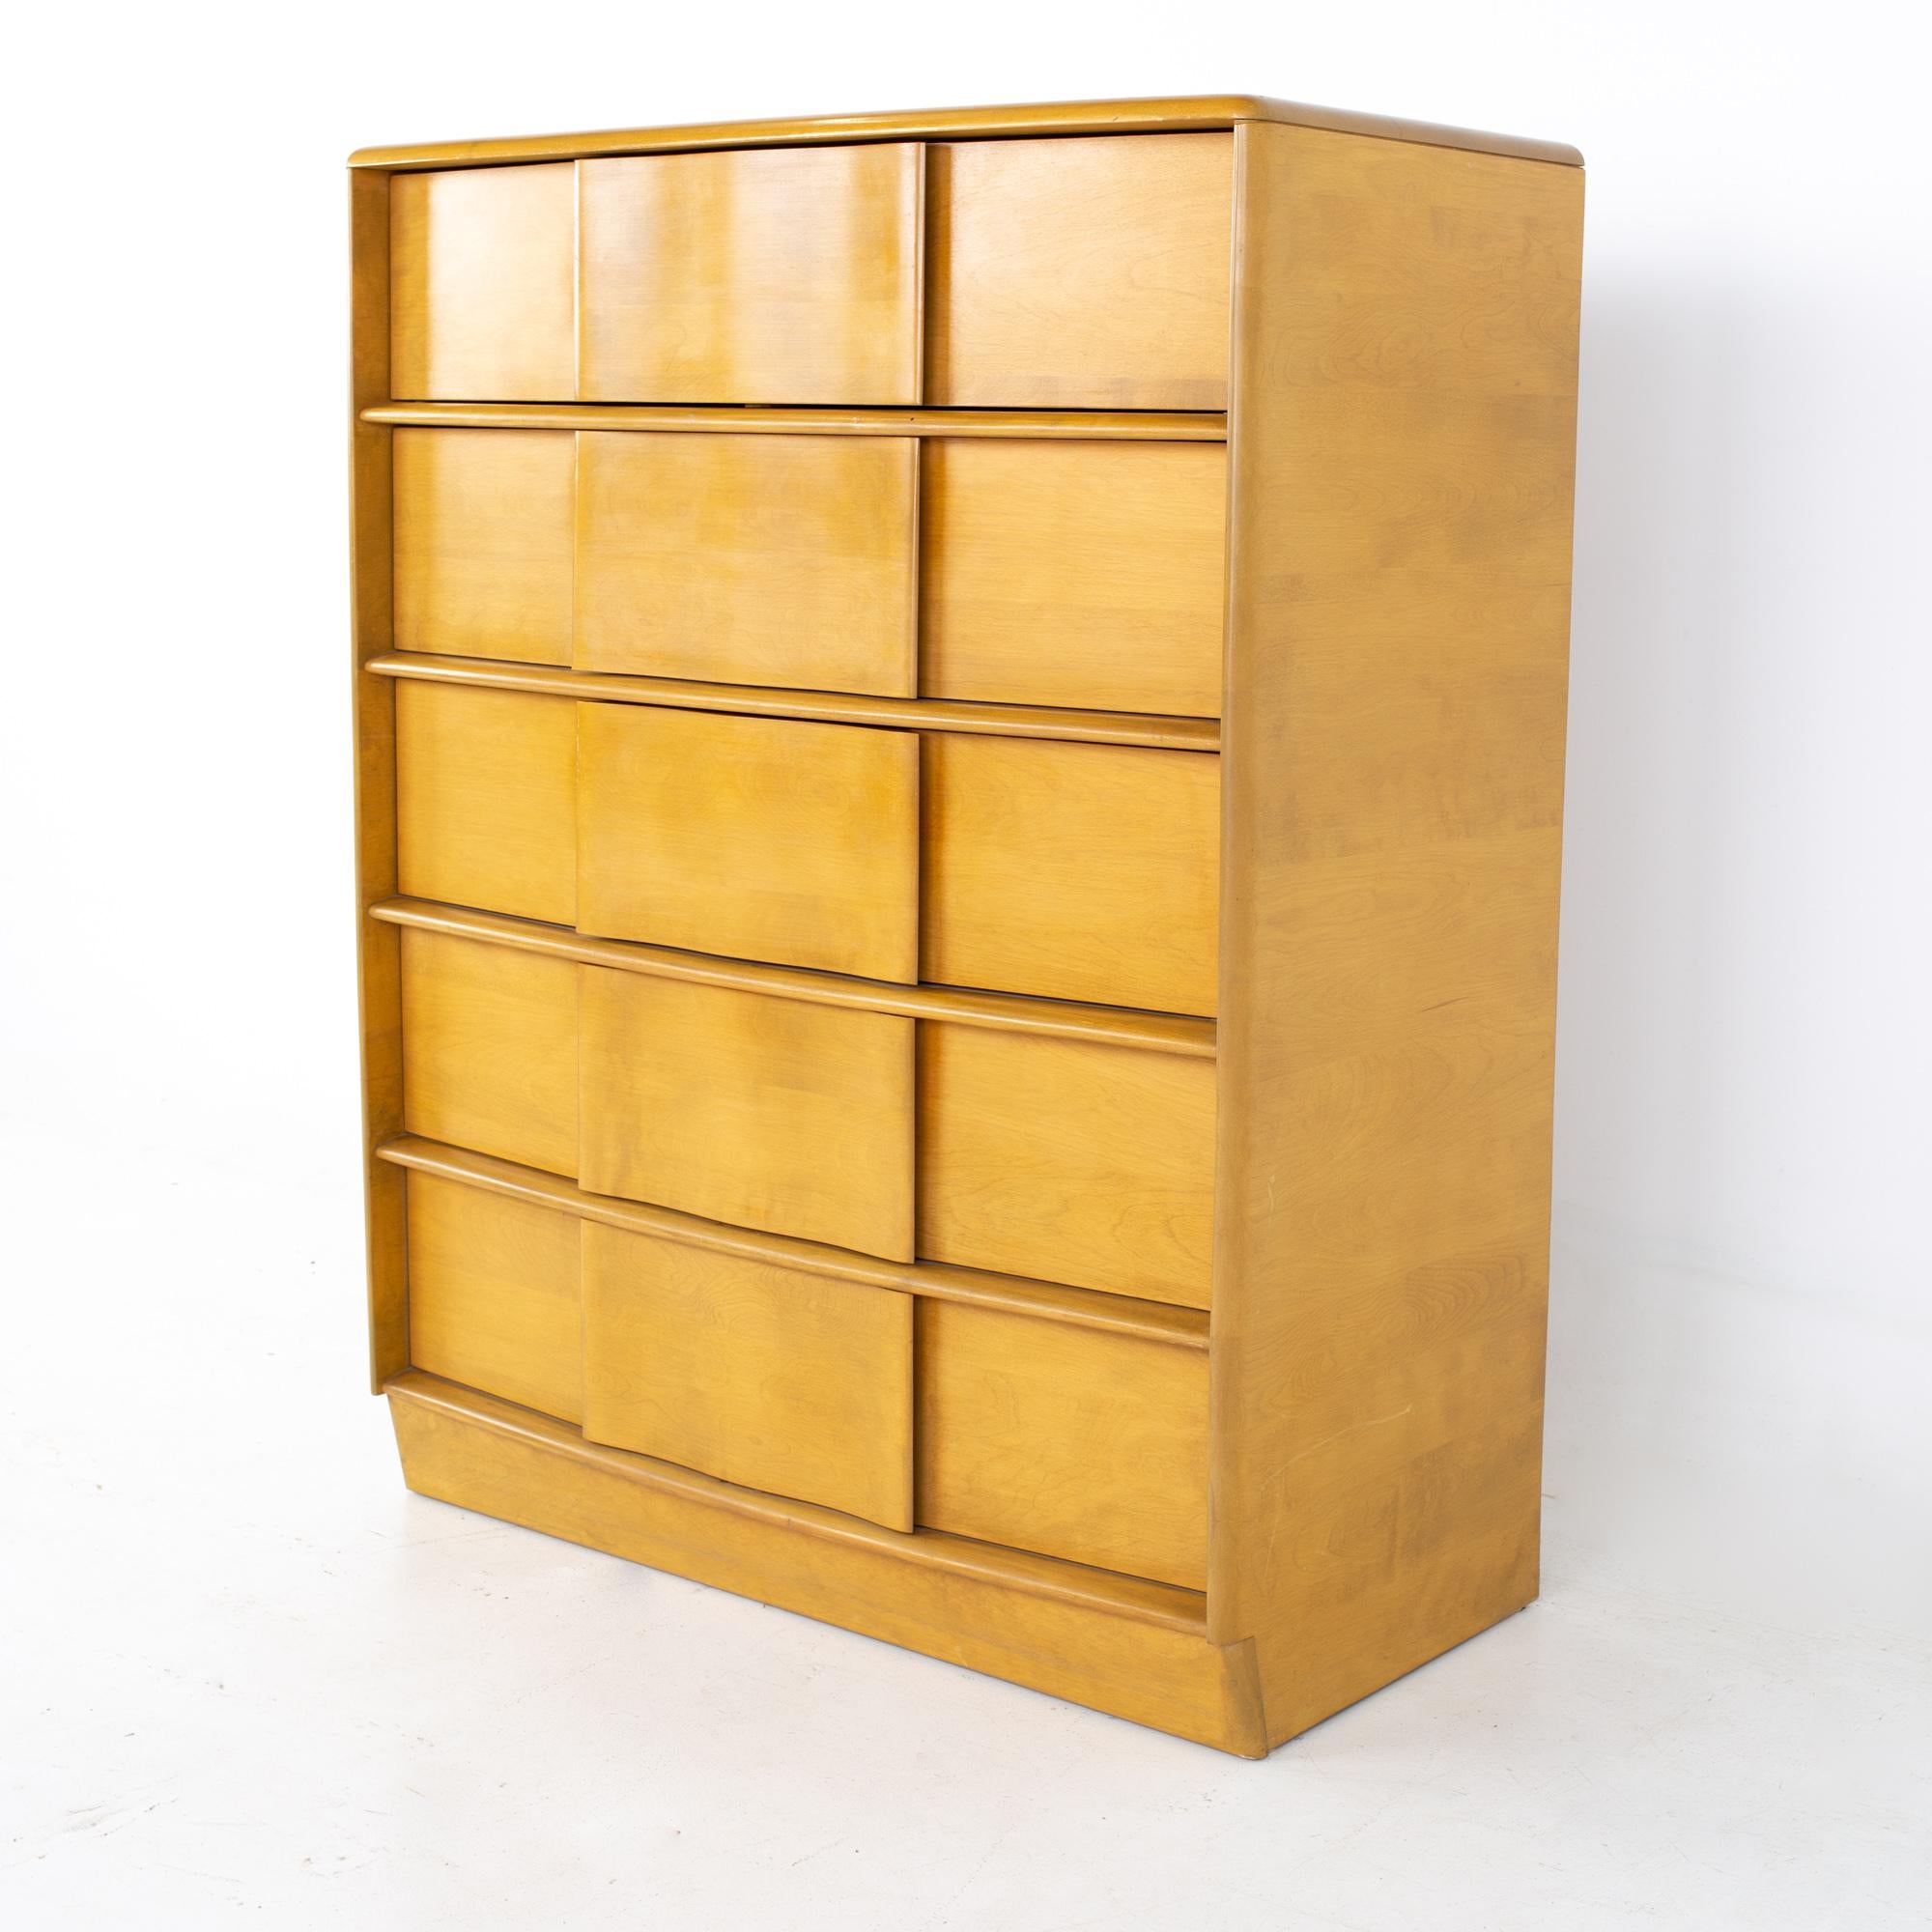 Heywood Wakefield sculptra mid century blonde wheat 5 drawer highboy dresser
Dresser measures: 38 wide x 19.5 deep x 47.5 inches high

All pieces of furniture can be had in what we call restored vintage condition. That means the piece is restored